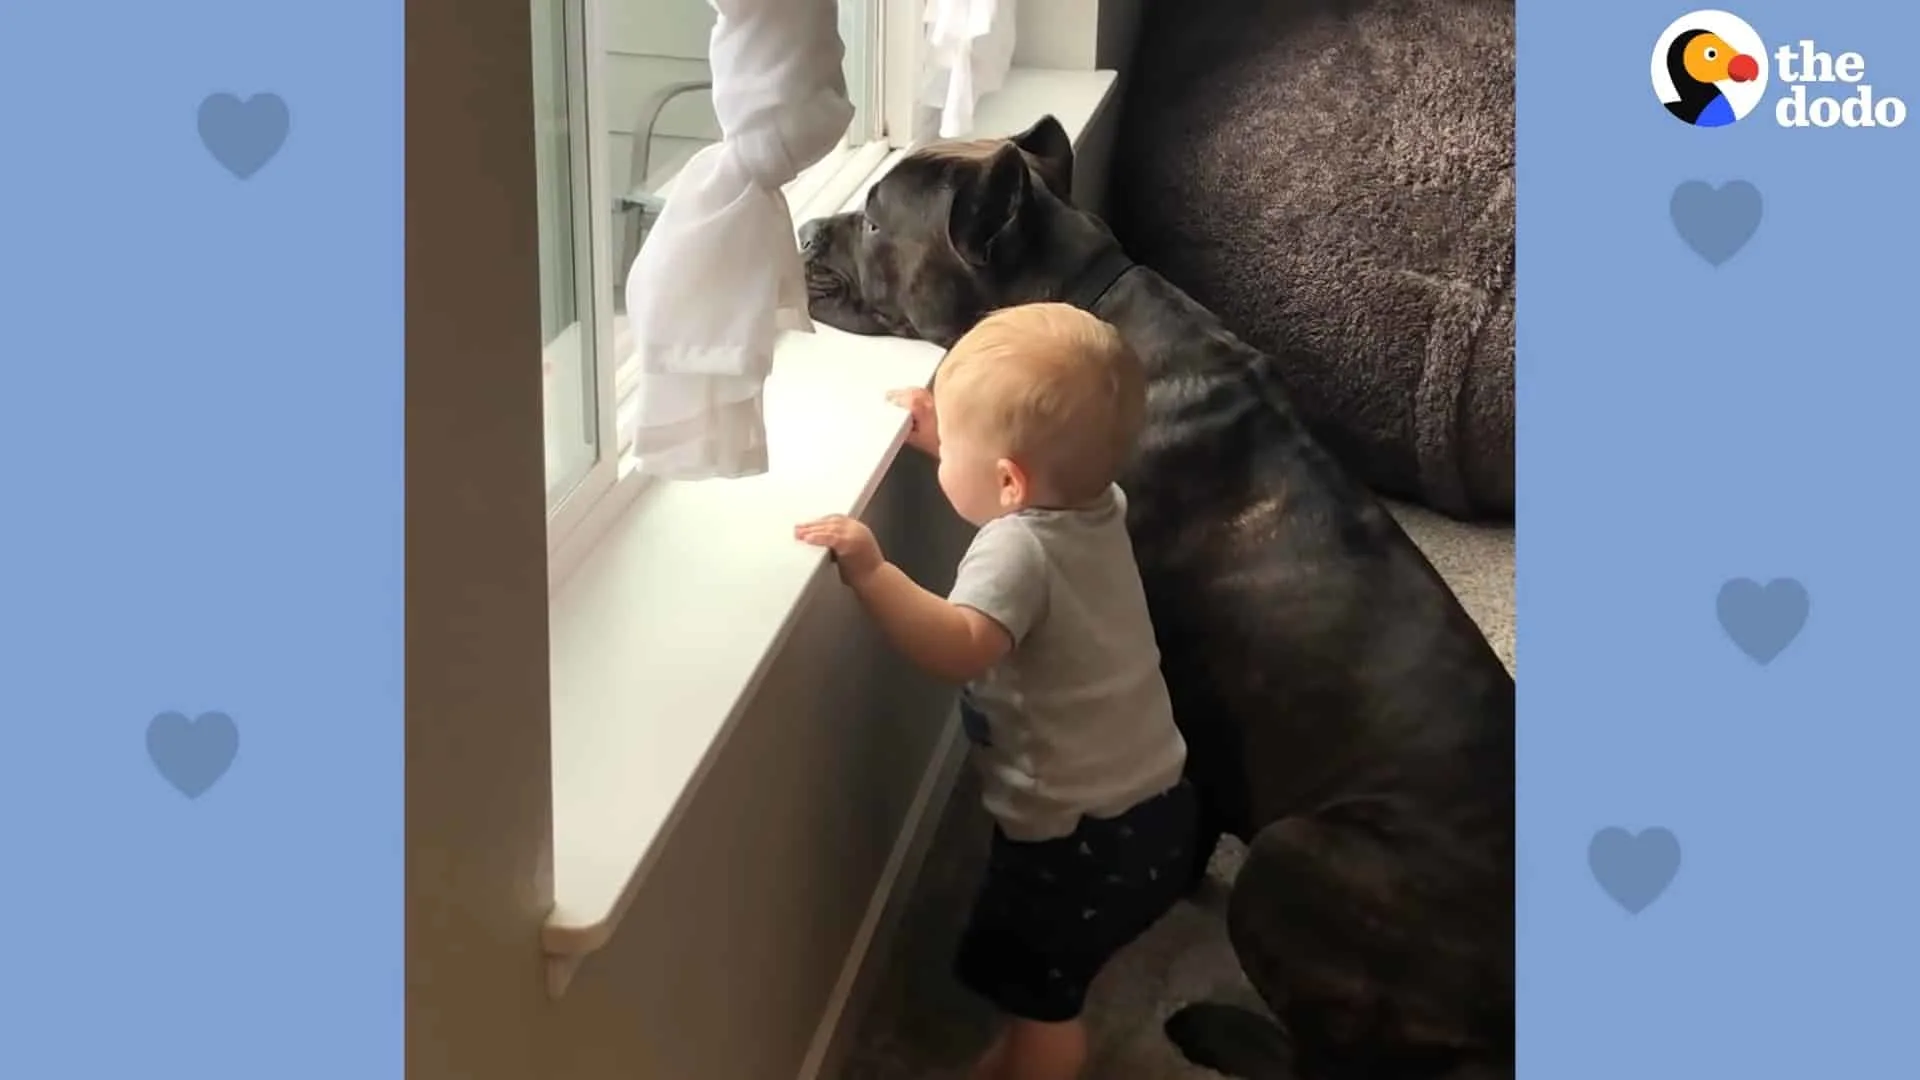 cane corso and baby watching by the window together